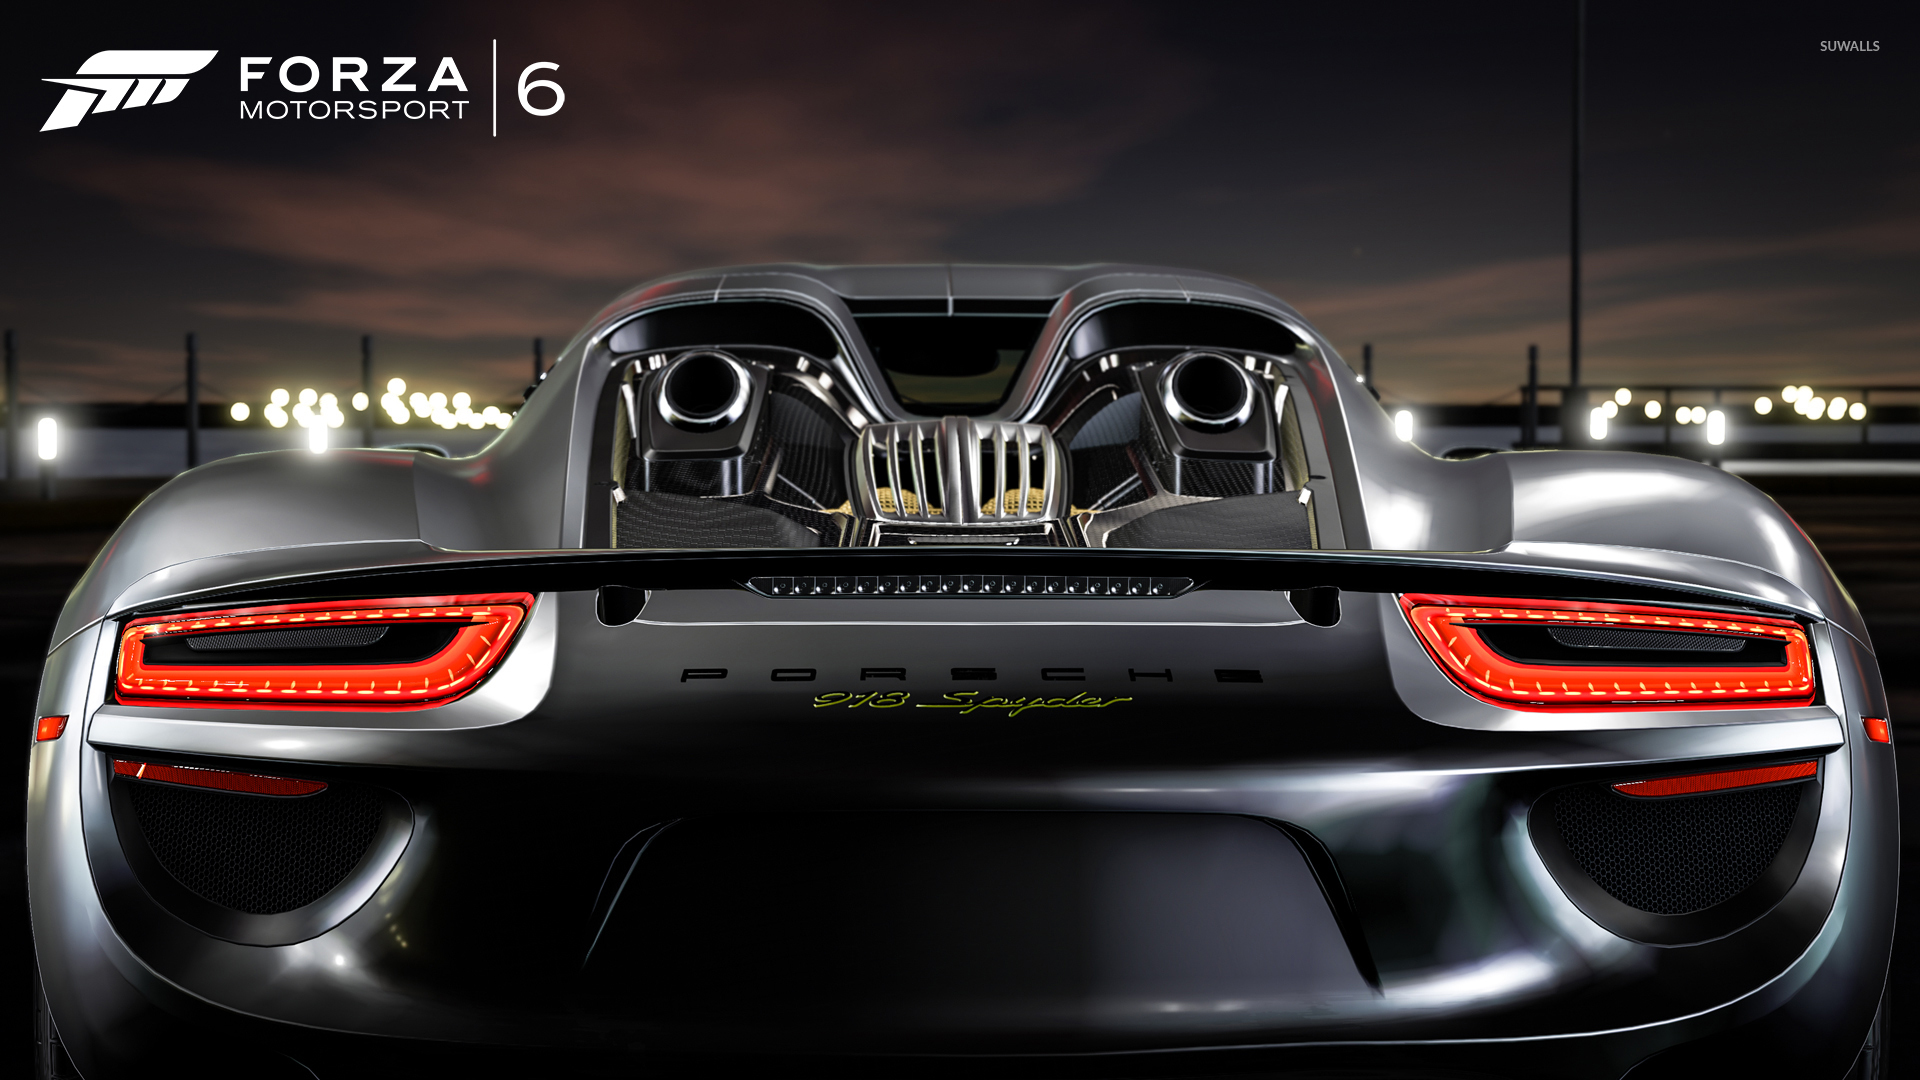 Back View Of A Porsche 918 Spyder In Forza Motorsport 6 Wallpaper Game Wallpapers 53323